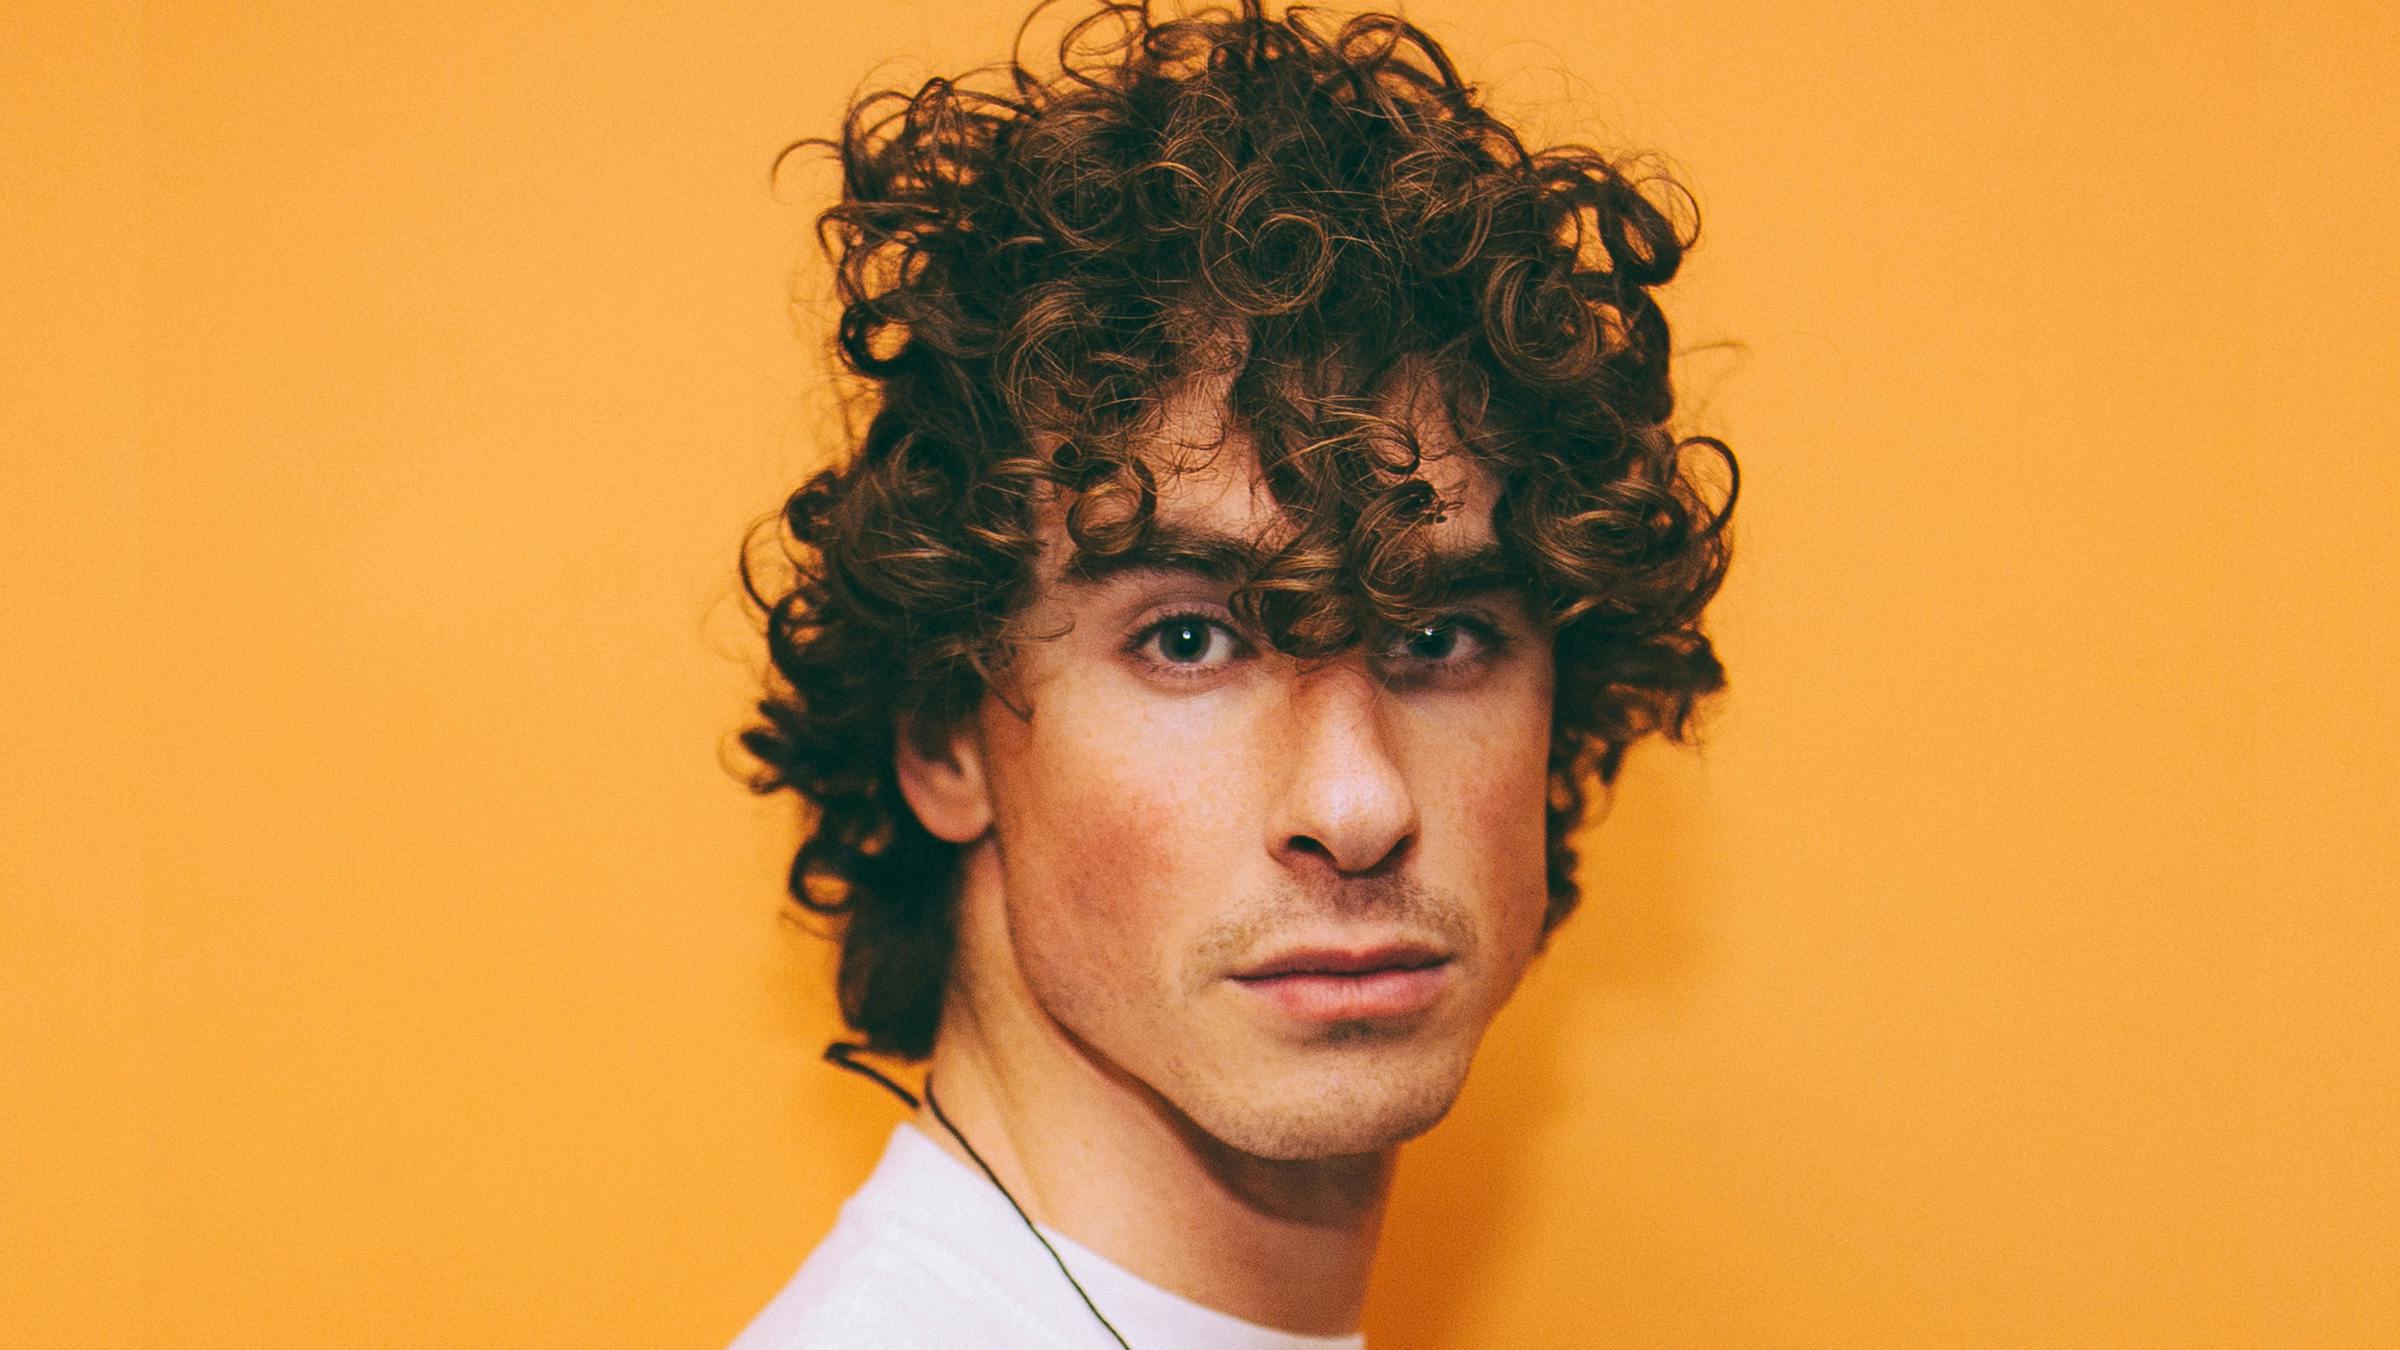 “I got my back snapped in a mosh-pit”: 13 Questions with Rob Damiani